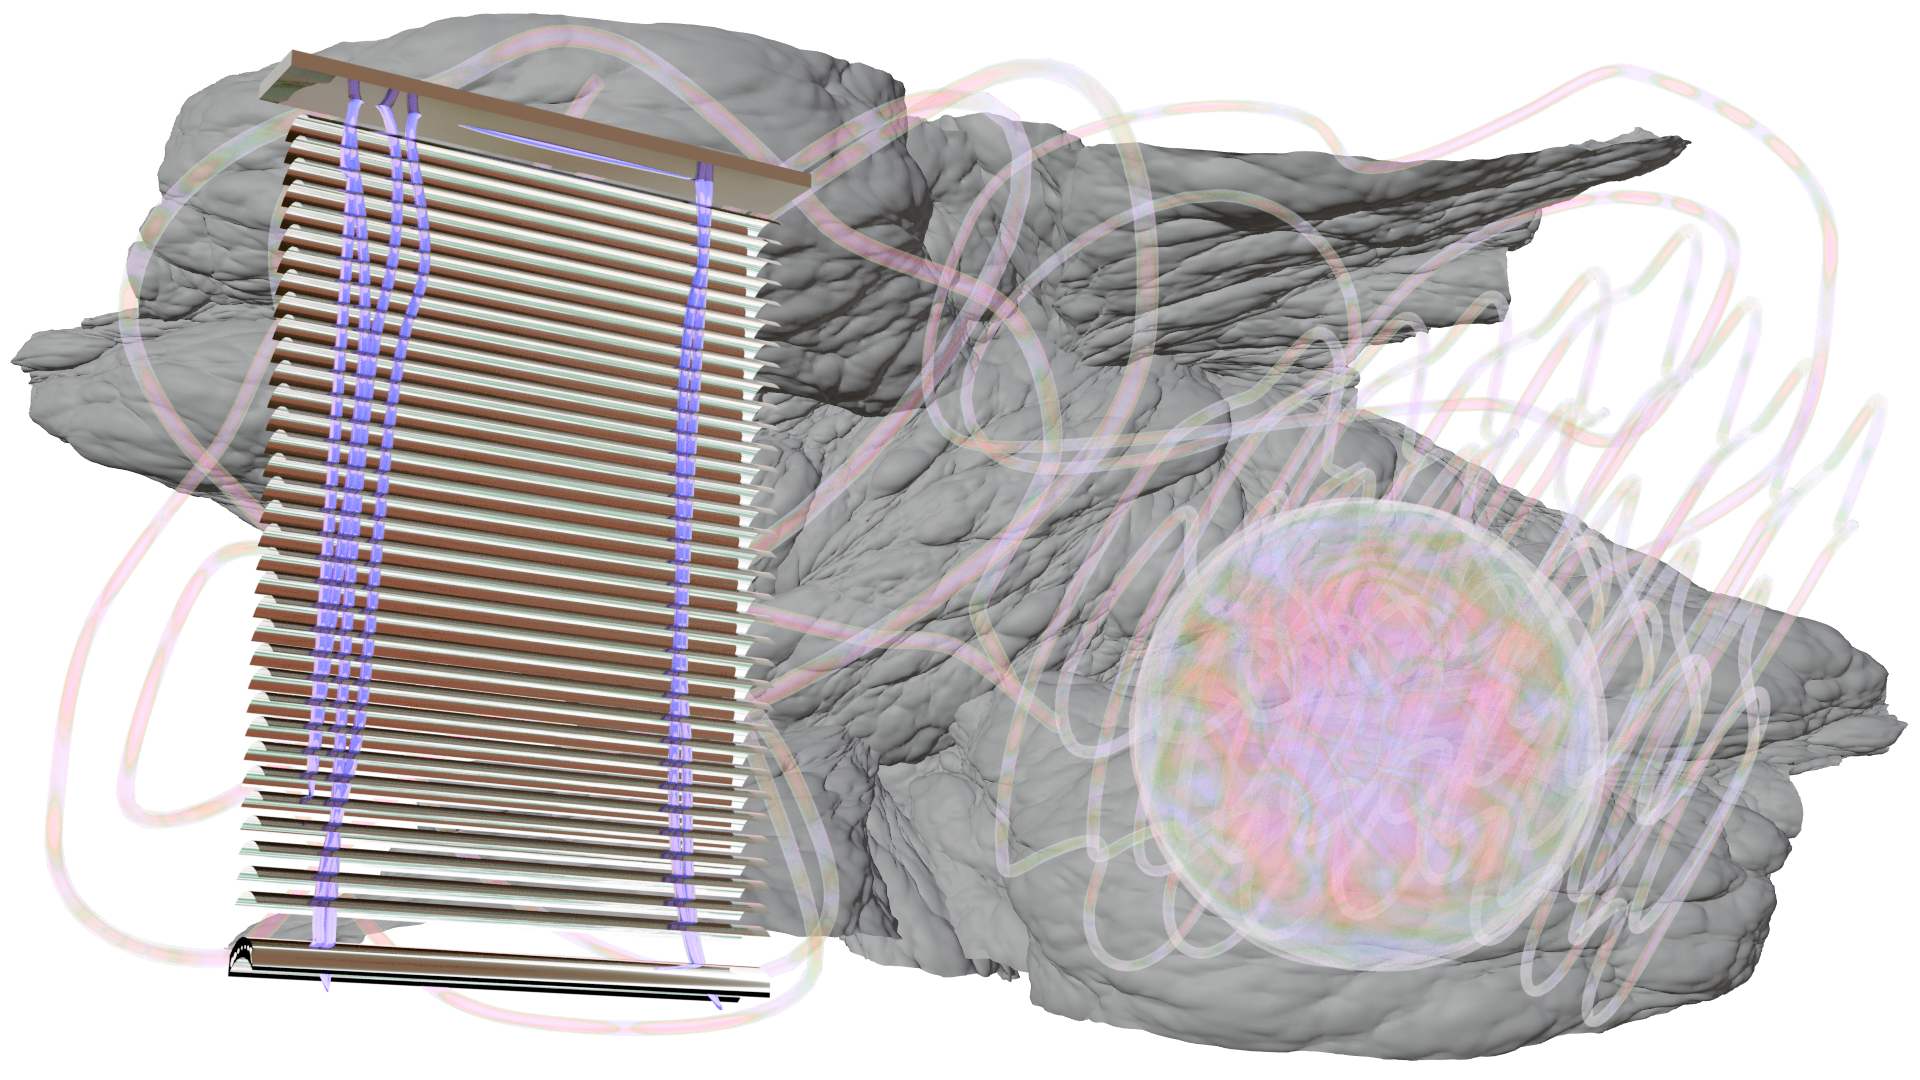 An iridescent window blind is extended down the left hand side. It’s cables are bright purple. To the right is a translucent bubble, filled with squiggles and lines of varying pastel colours. These squiggles and tubes also fill the image, trailing away from the bubble. Behind these objects is an expanse of grey matter, similar to a dark cloud. The background is empty.